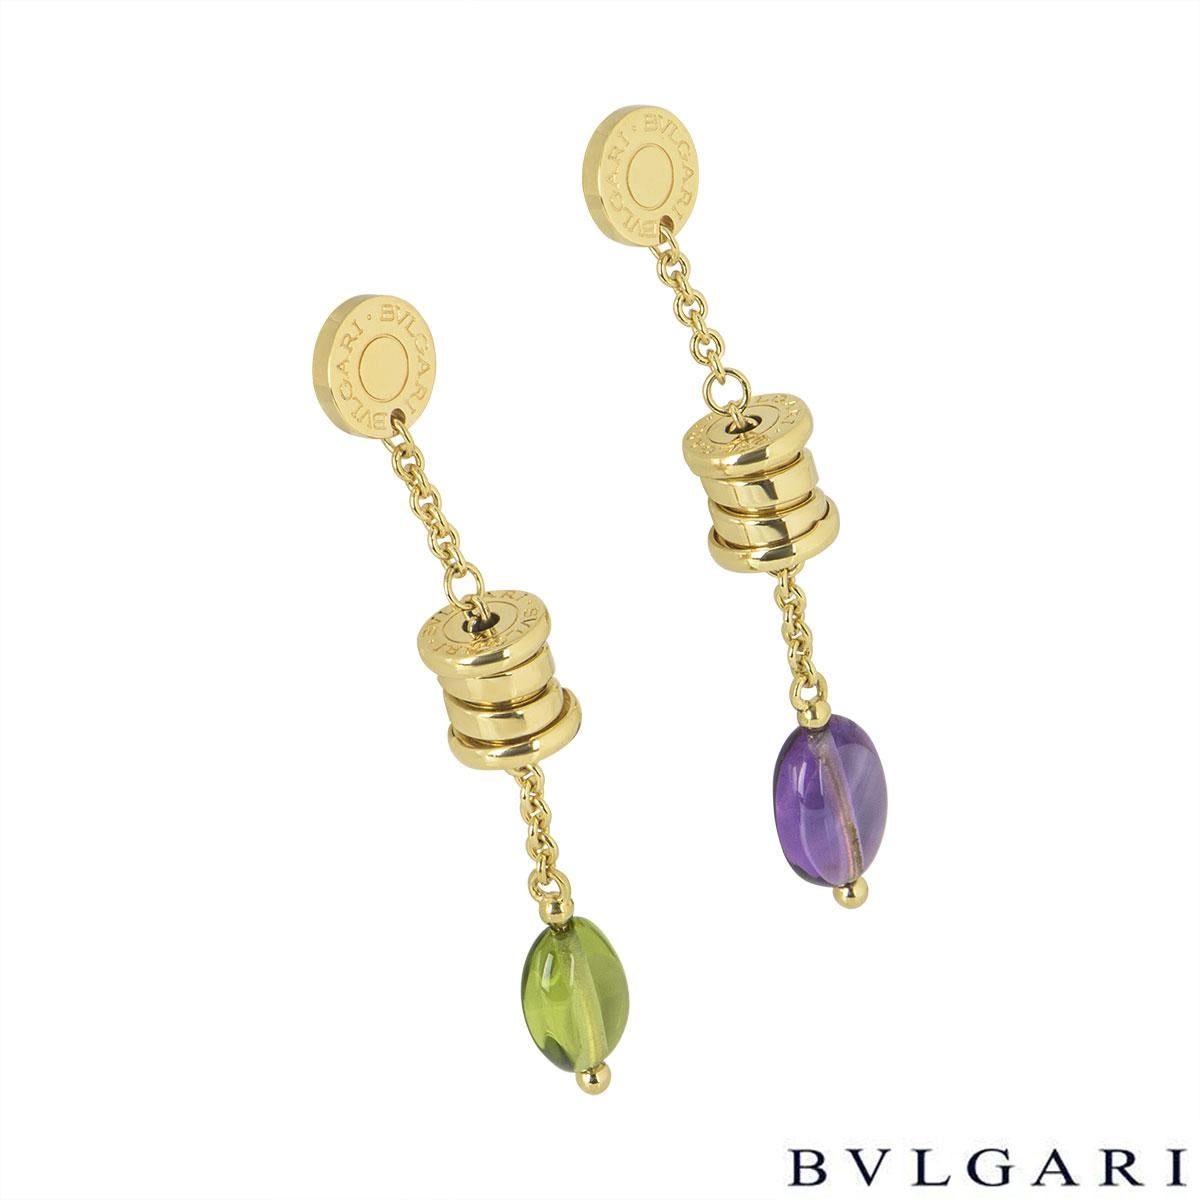 An 18k yellow gold pair of multi-gem earrings by Bvlgari from the B.zero1 collection. The earrings each comprise of the iconic 'Bvlgari Bvlgari' motif disc with the Bvlgari drum suspended from it and suspended from the barrel is a single peridot on